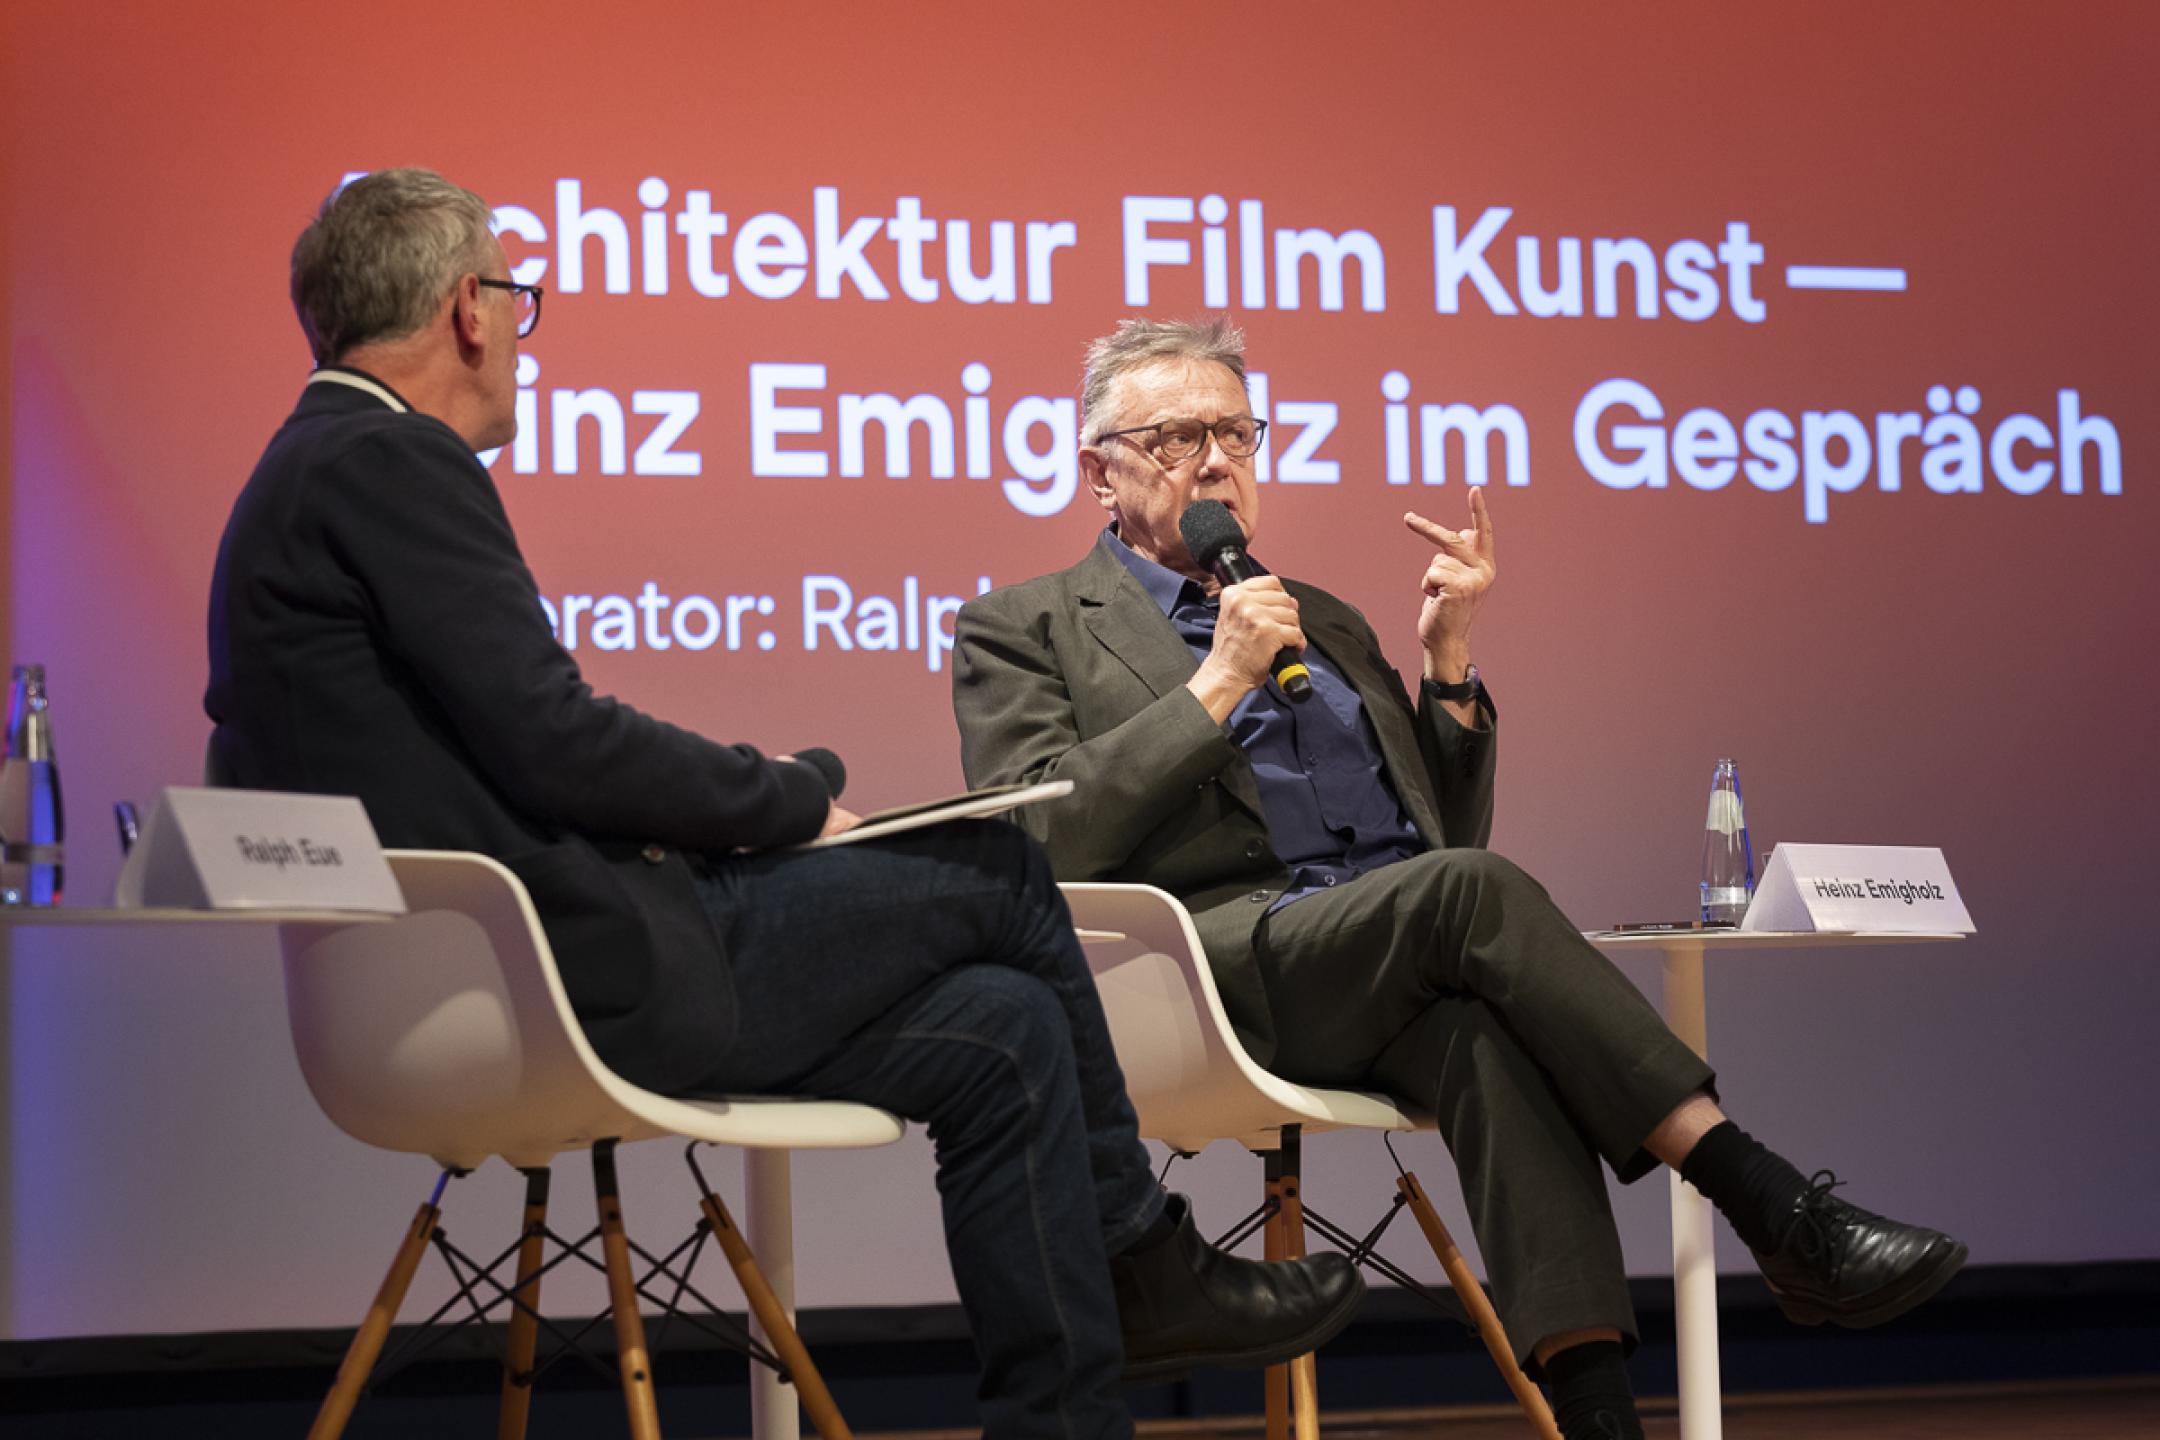 Filmmaker Heinz Emigholz sits next to another man on a panel. He leans back in his chair and speaks into a handheld microphone while gesturing with his other hand.